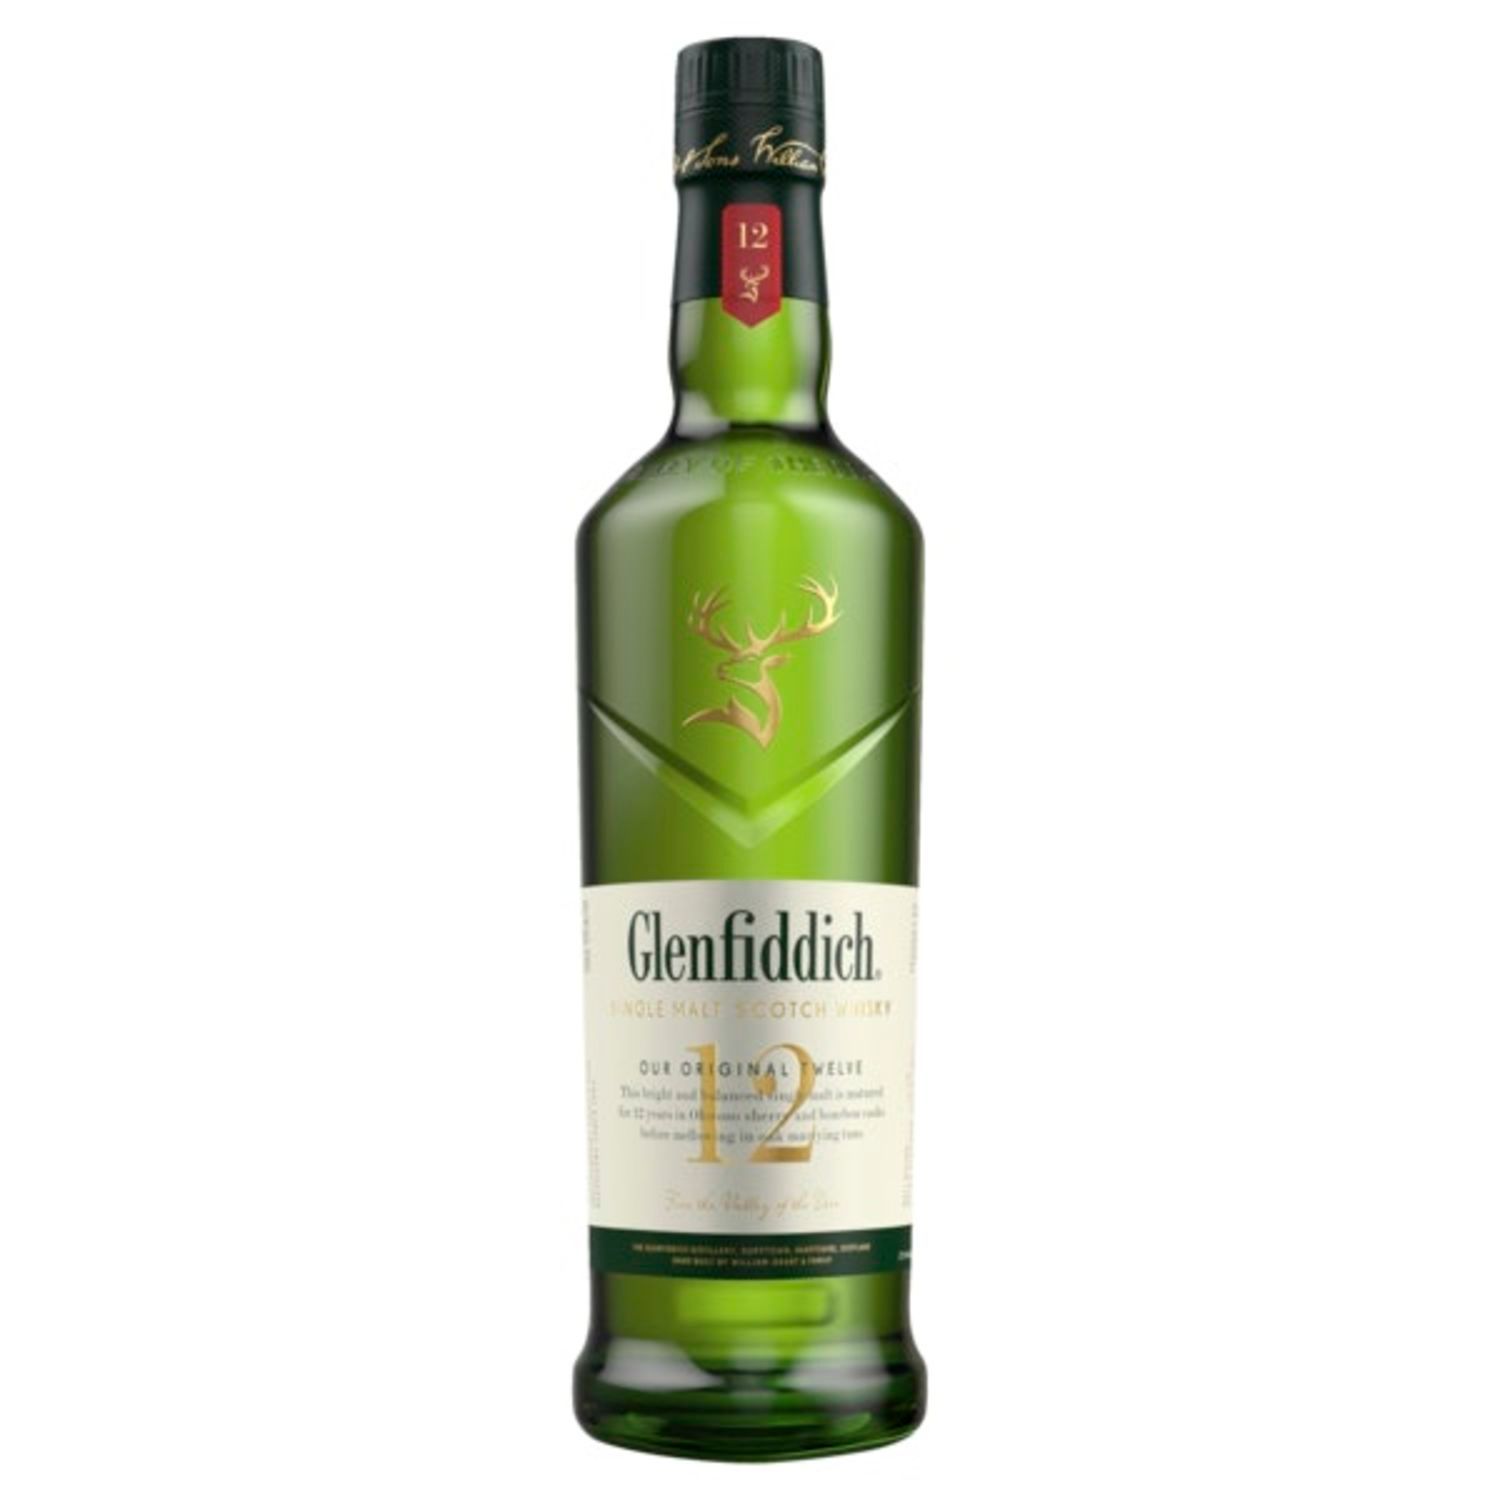 The Glenfiddich 12 Year Old bears all the hallmarks of our Speyside signature style, one that has made us the world's most awarded single malt.<br /> <br />Alcohol Volume: 40.00%<br /><br />Pack Format: Bottle<br /><br />Standard Drinks: 22</br /><br />Pack Type: Bottle<br /><br />Country of Origin: Scotland<br />